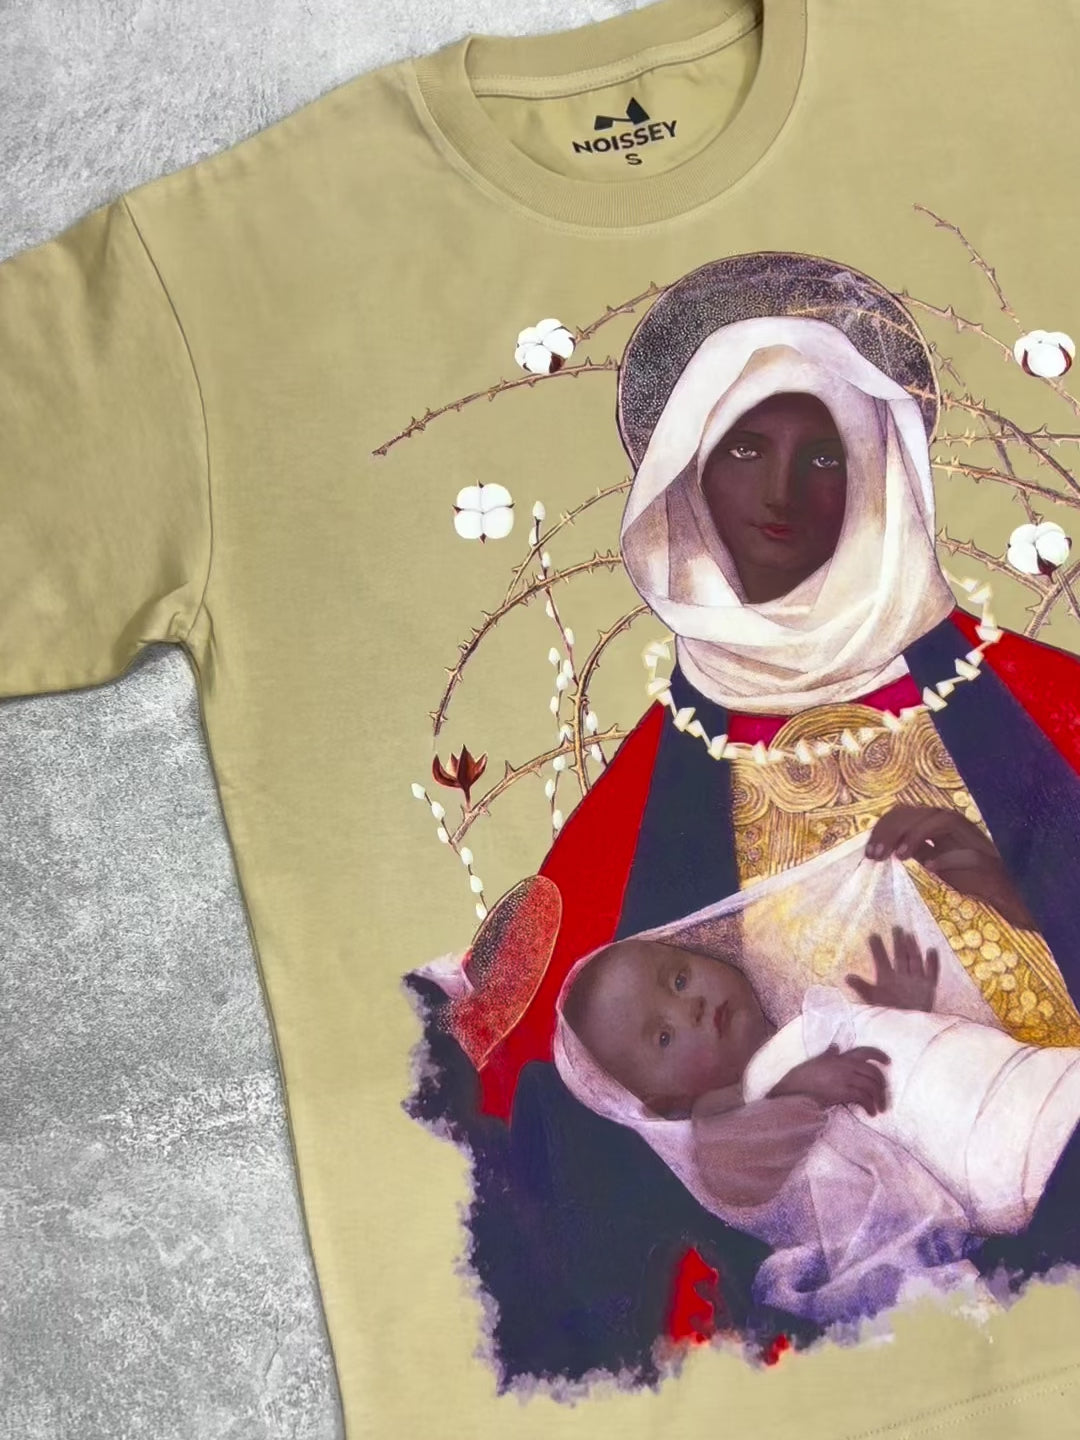 OBSTACLES & DANGERS© Artistic Black Madonna and Child T-shirt